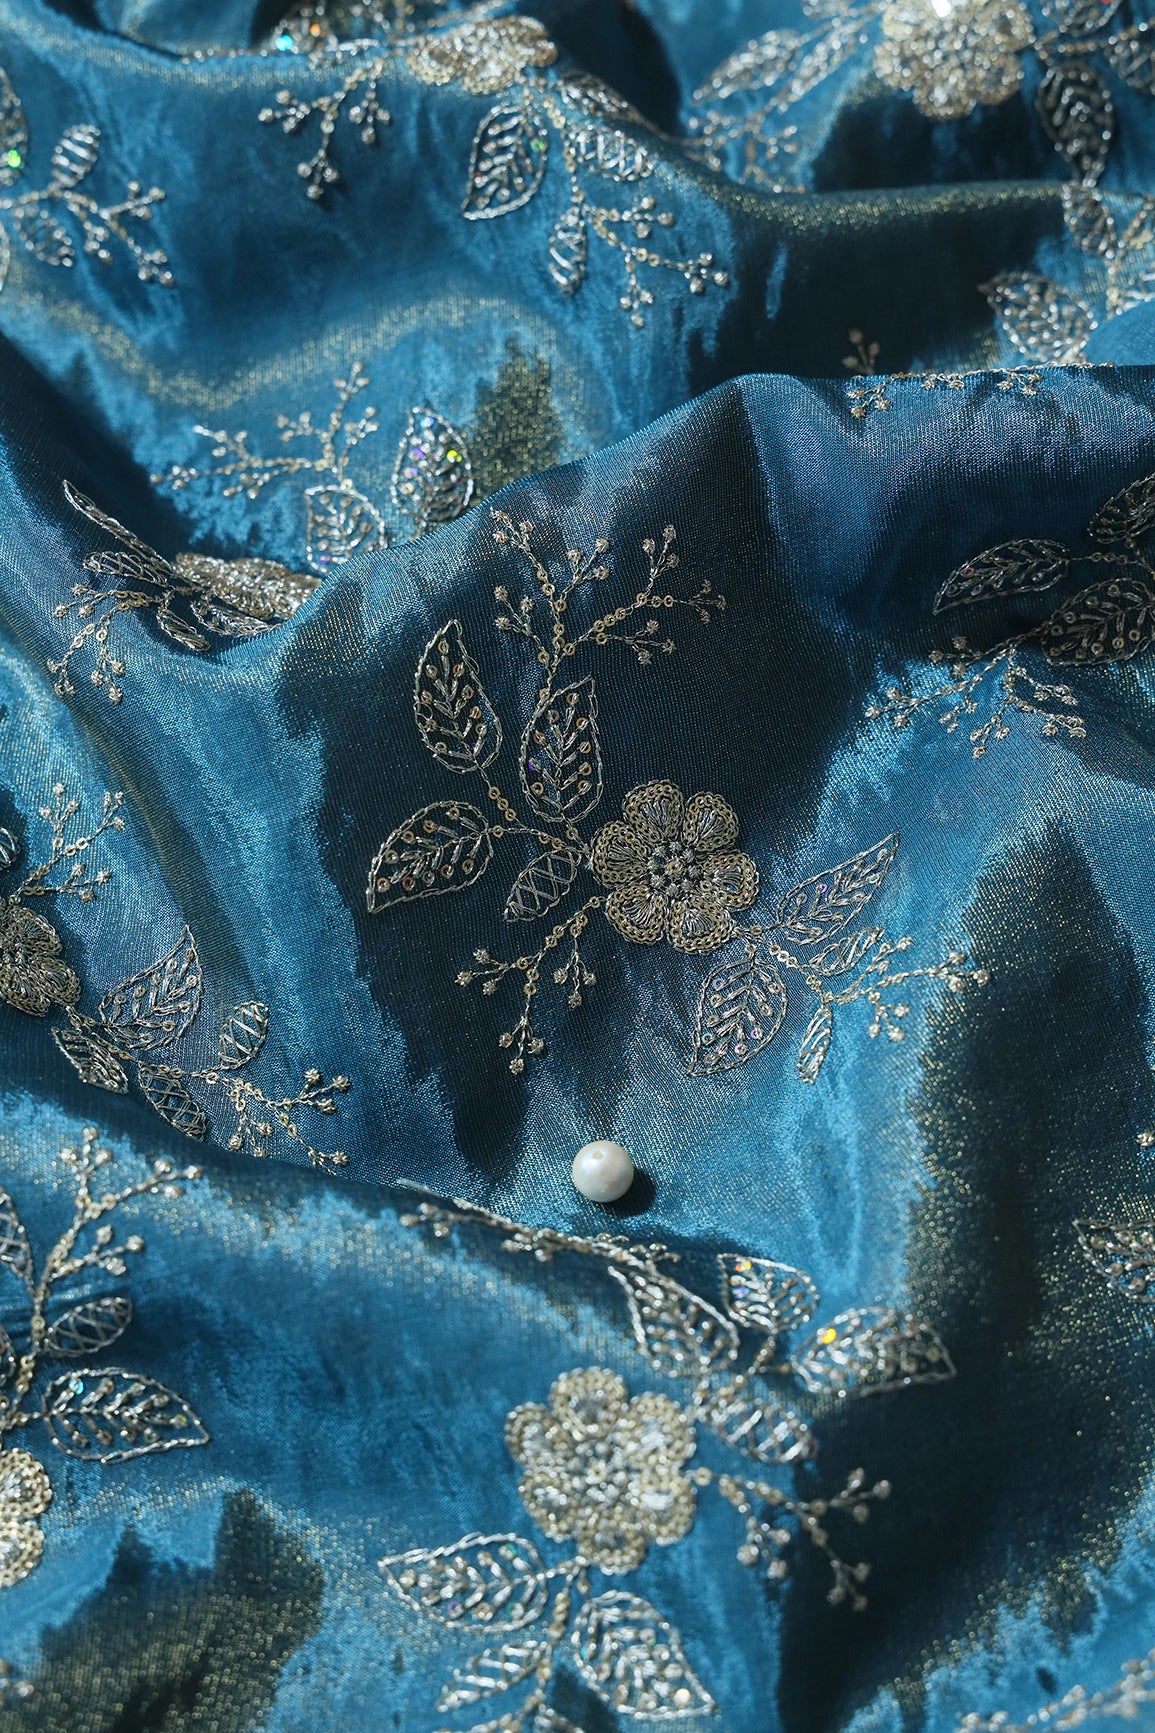 Gold Sequins And Zari Floral Embroidery Work On Turkish Blue Pure Viscose Zari Tissue Fabric